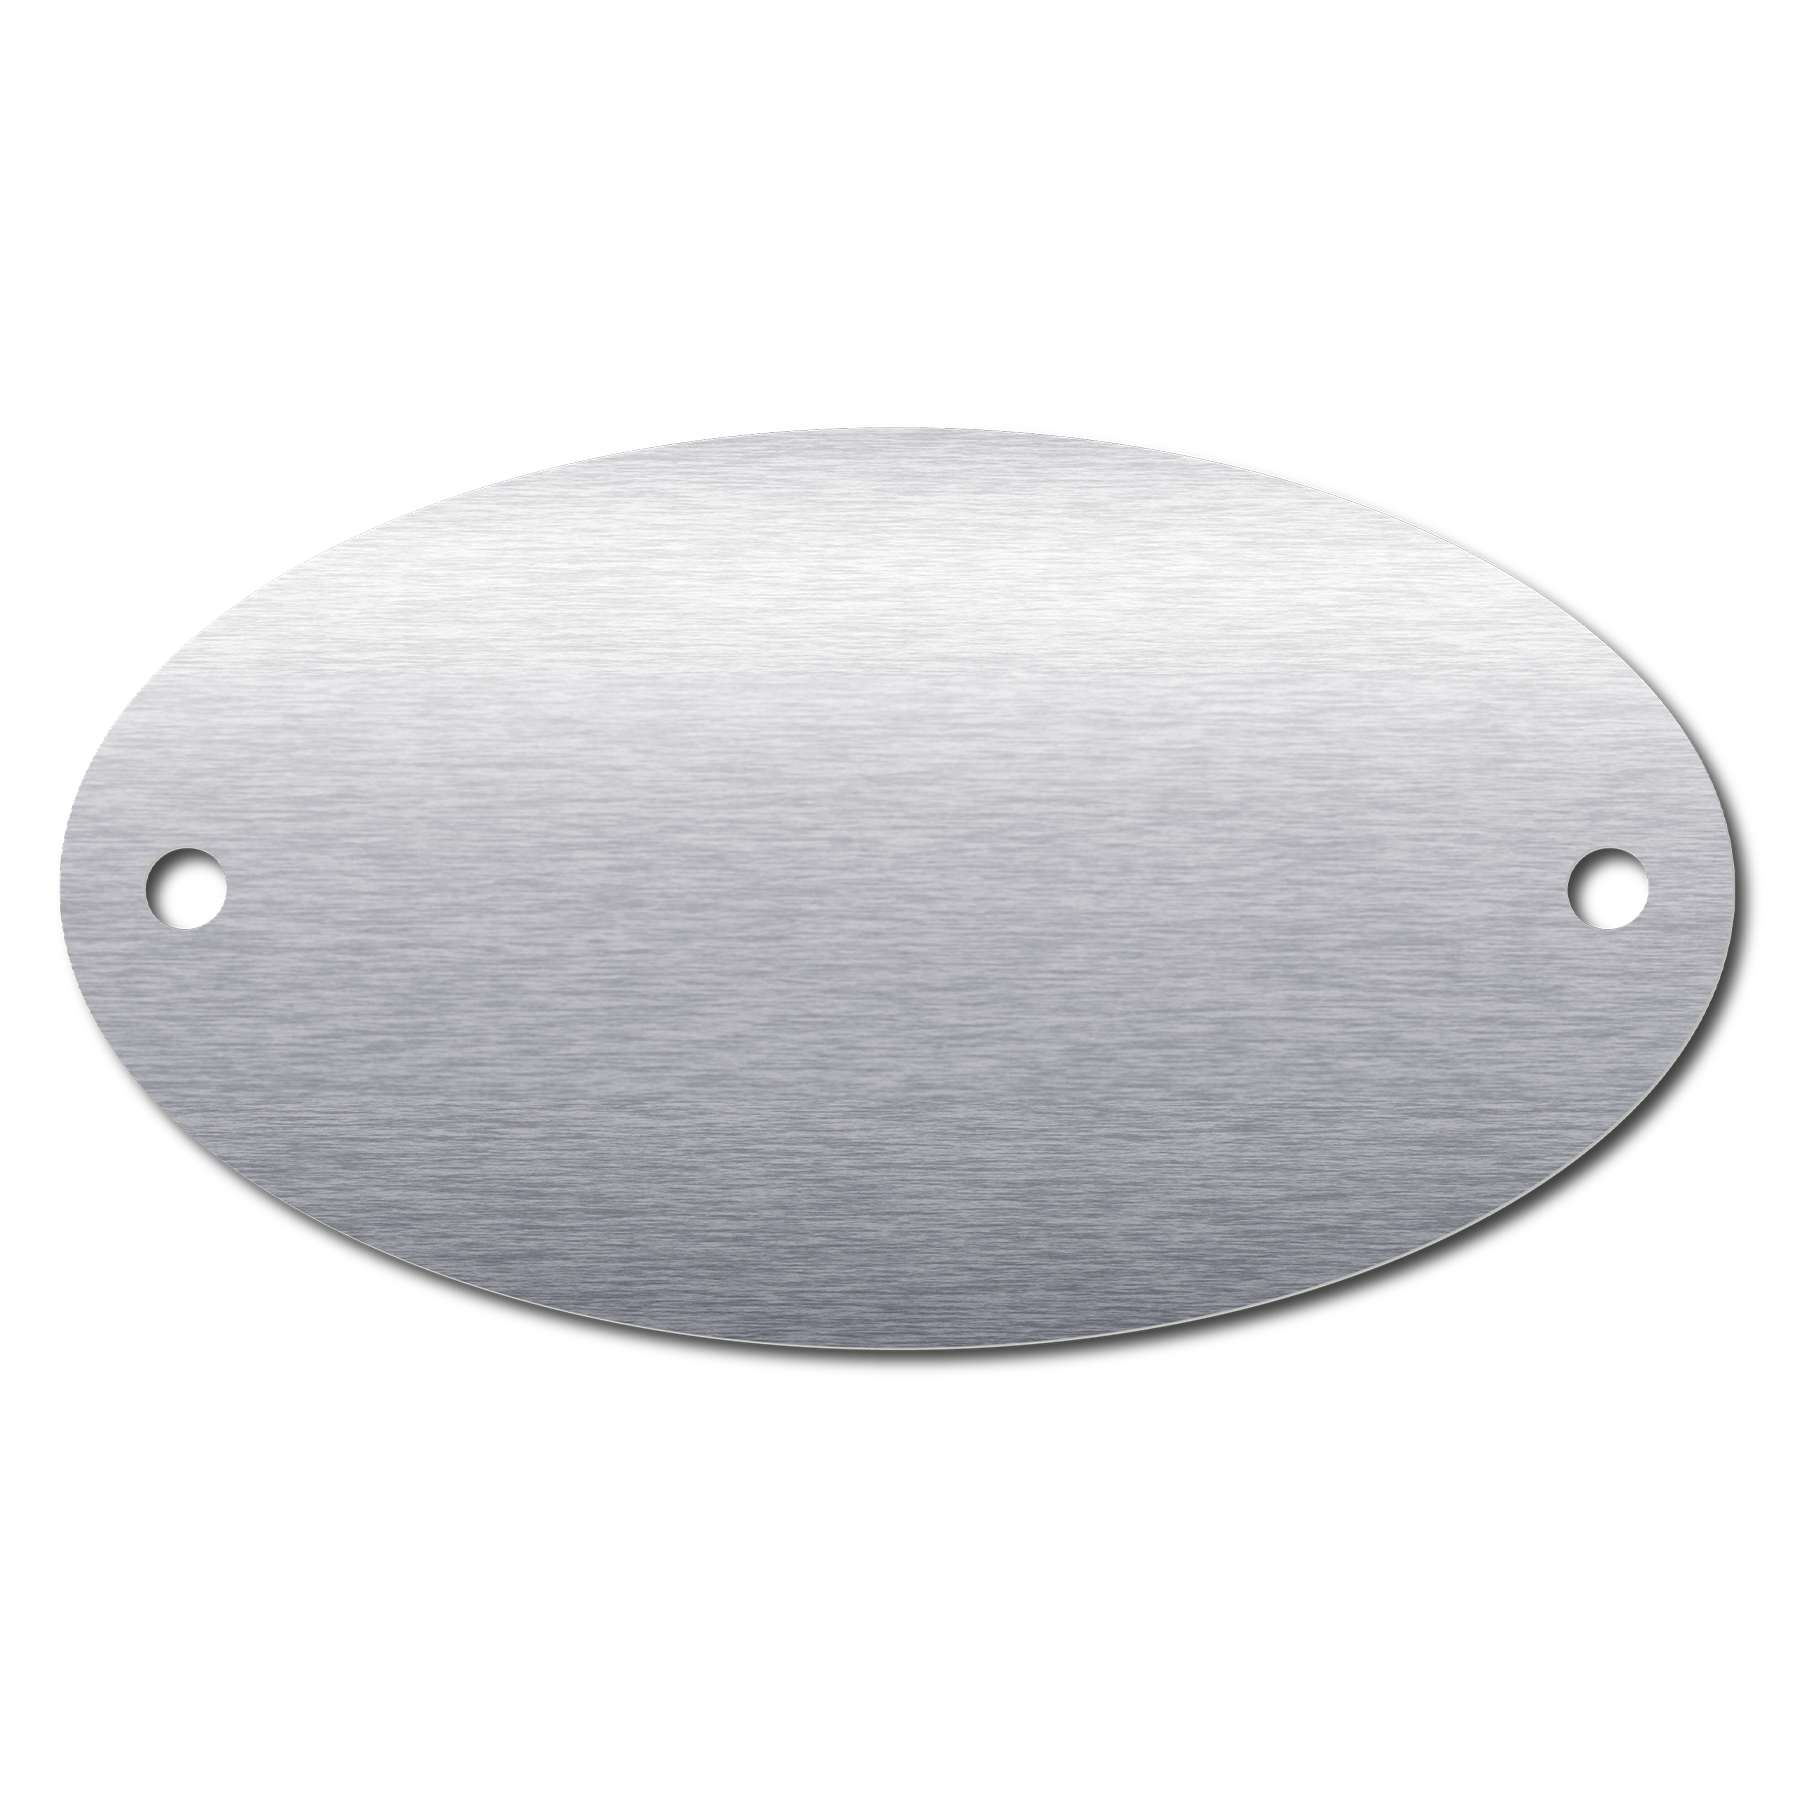 Anodized Aluminum Oval Tags, 1-3/8" x 2-1/2" with 1/8" Holes, Laser Engraved - Craftworks NW, LLC